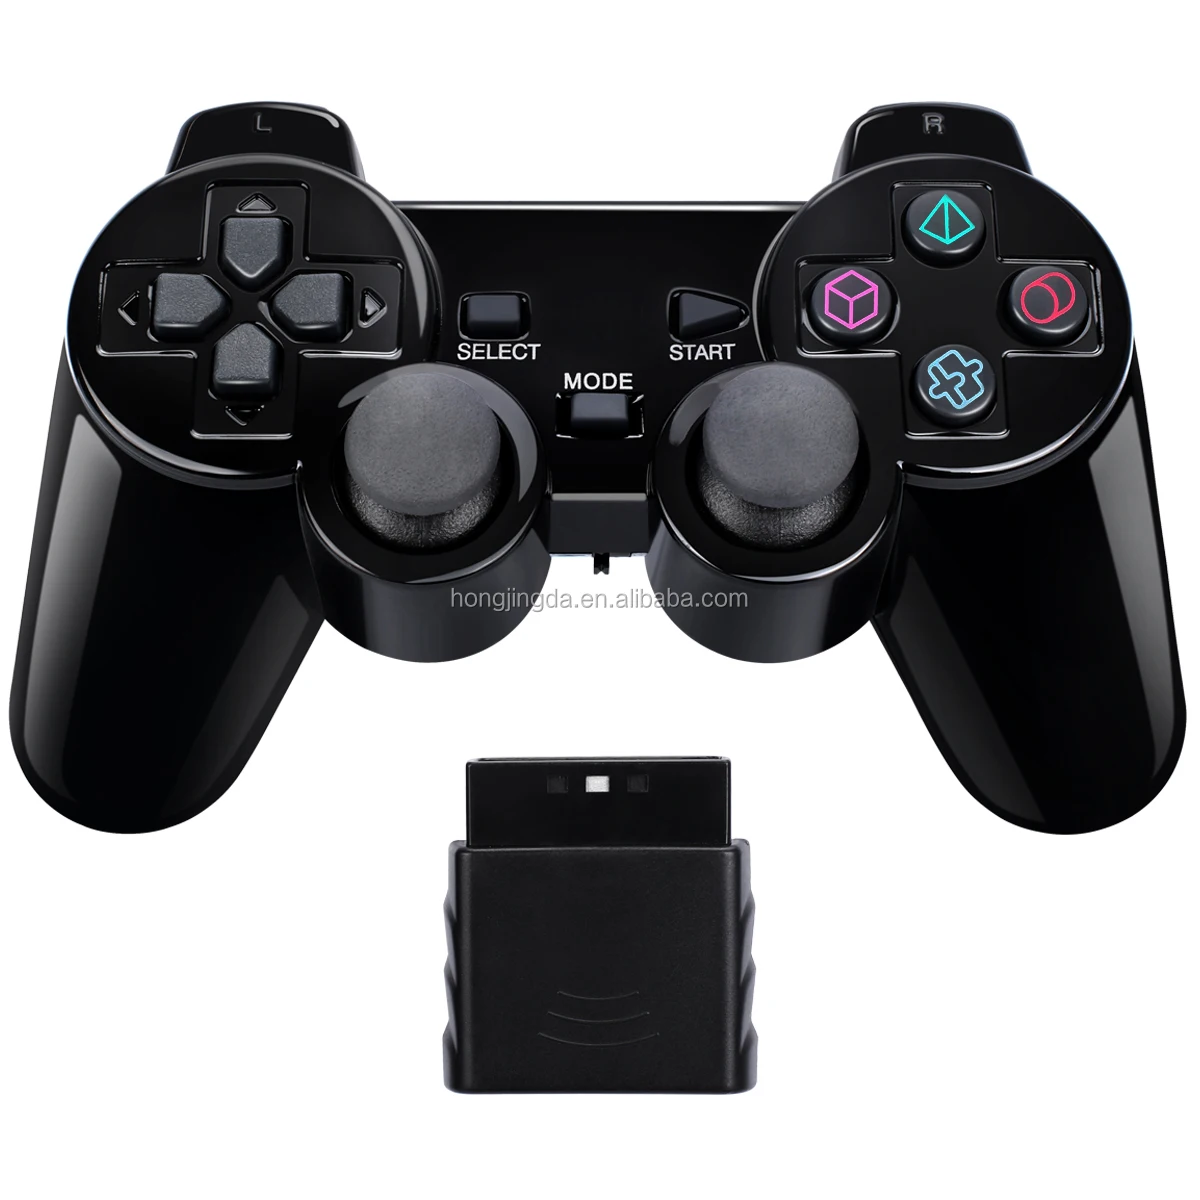 ps3 controller on ps2